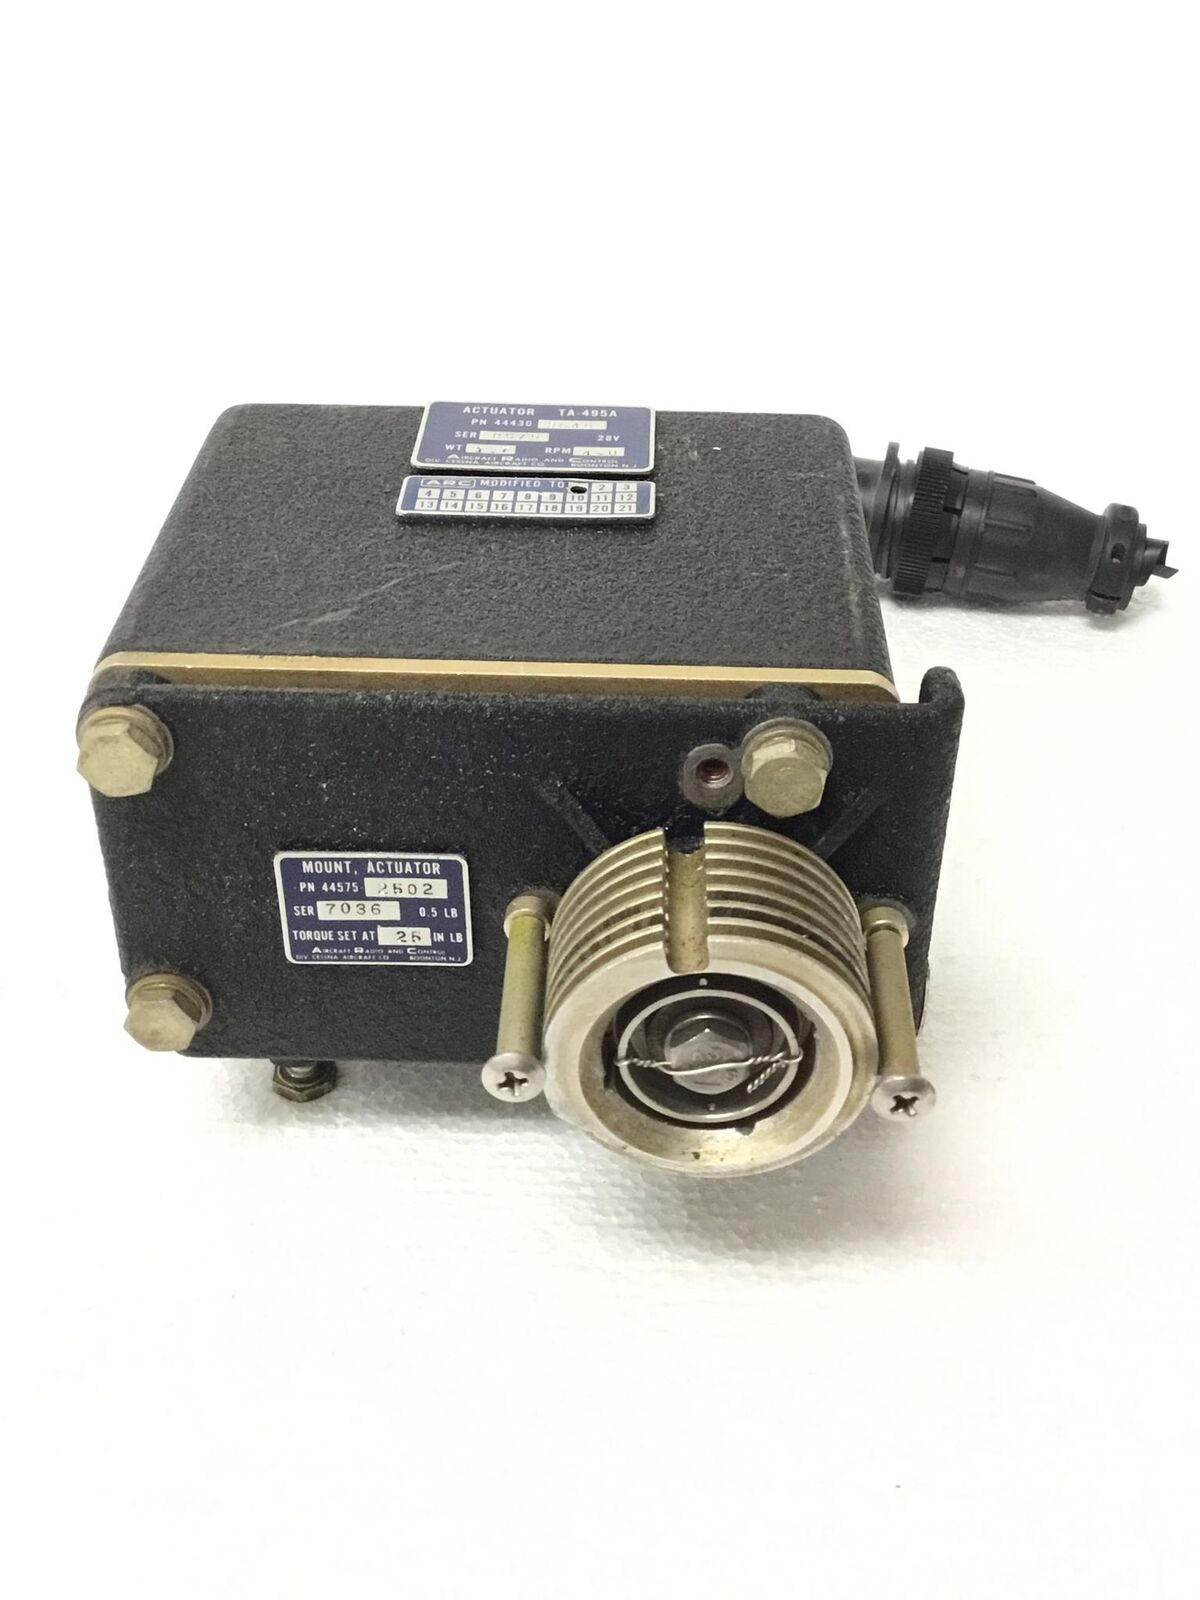 AIRCRAFT Radio Control ACTUATOR TA-495A with Cable WORKING 